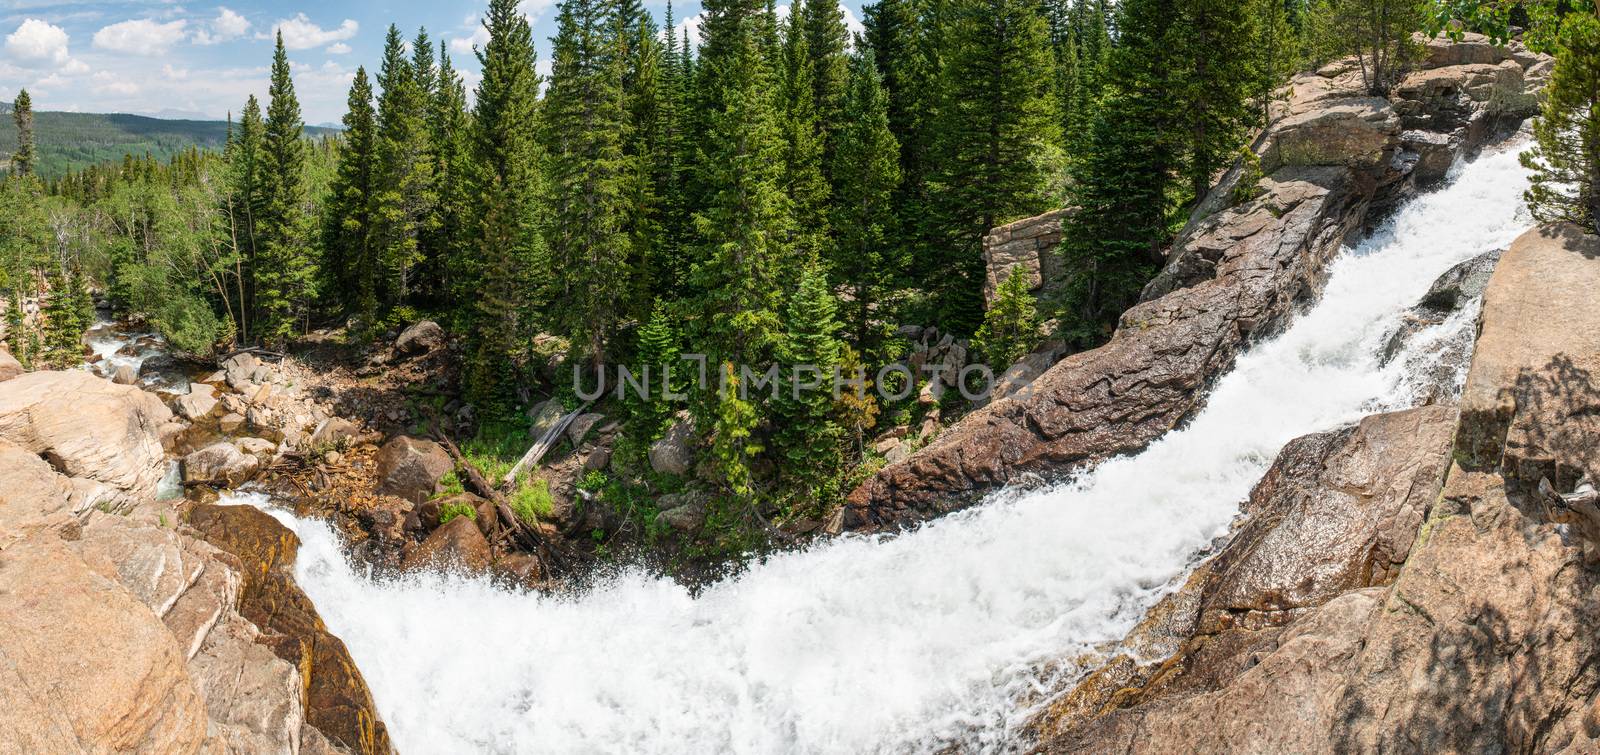 Panorama from Glacier Creek Trail to Alberta Falls in Rocky Mountain National Park, Colorado